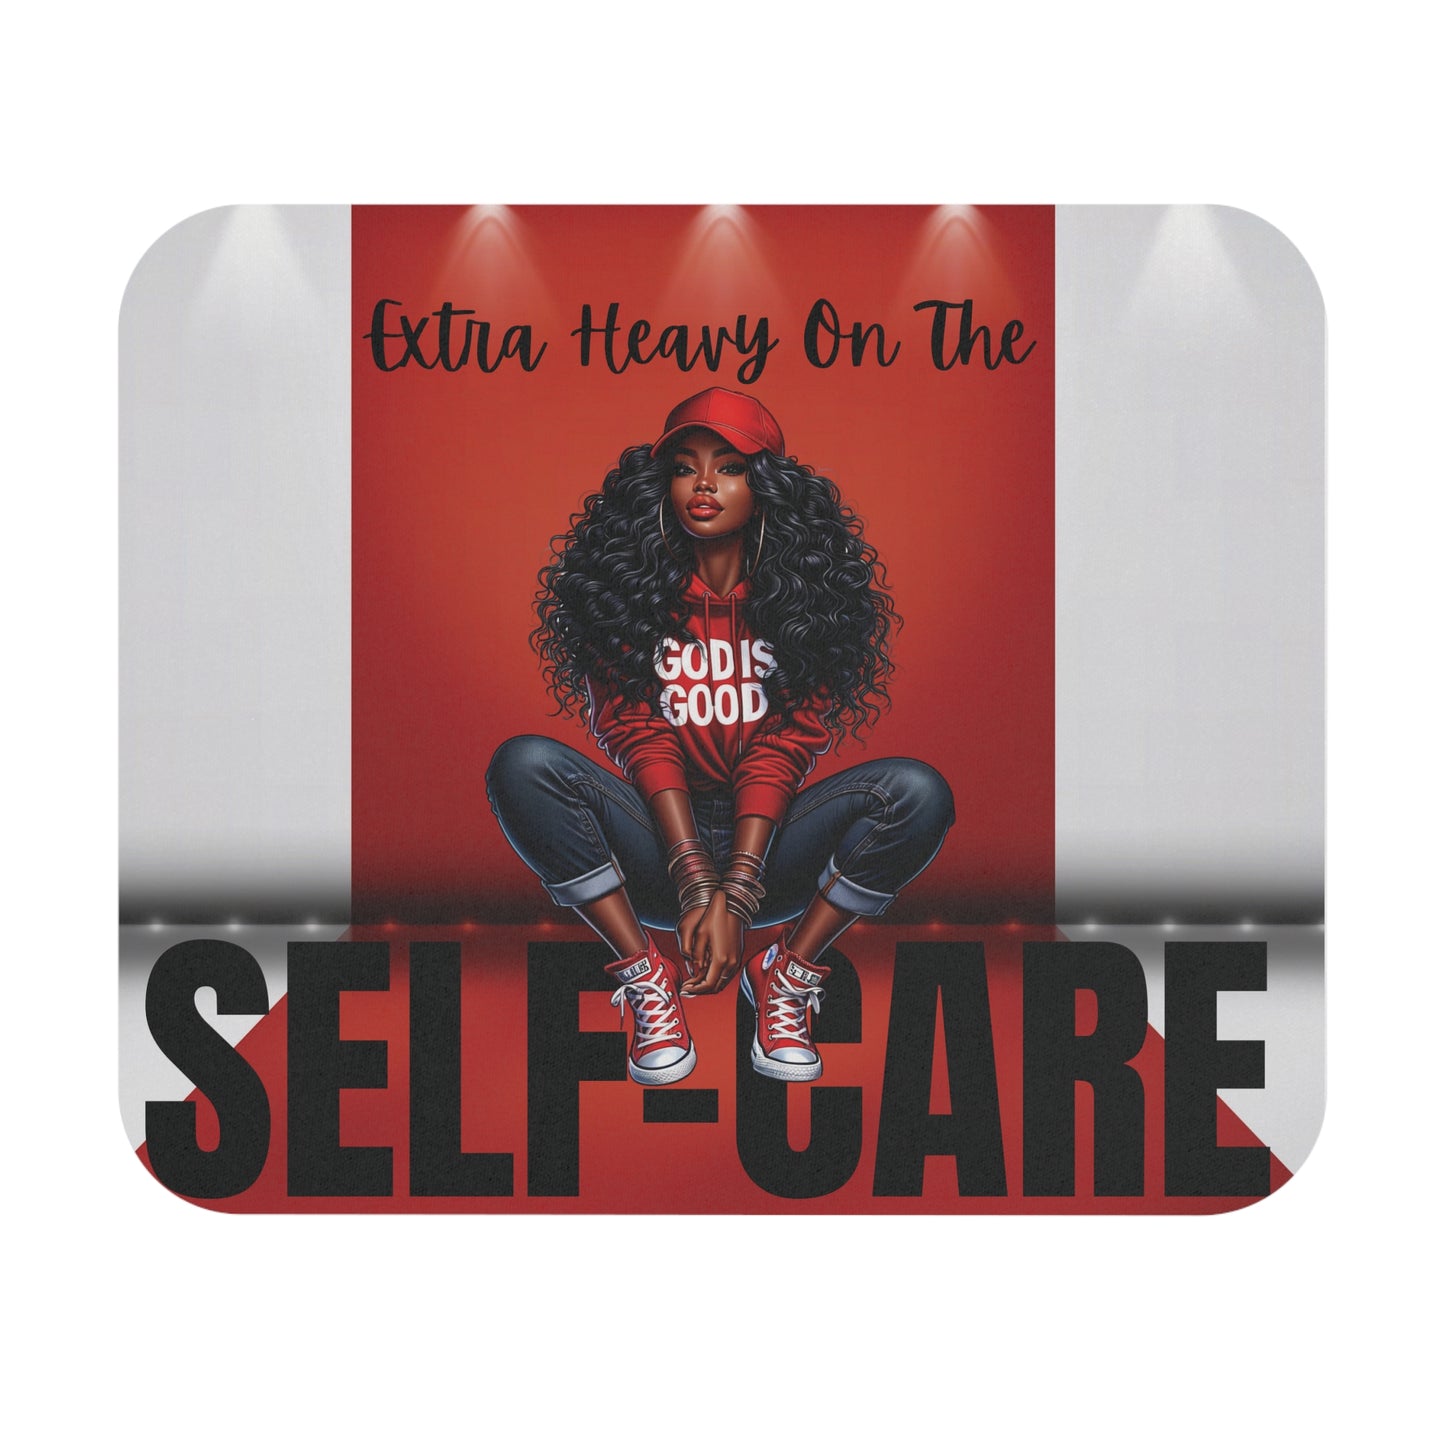 Extra Heavy On The SELFCARE Mouse Pad